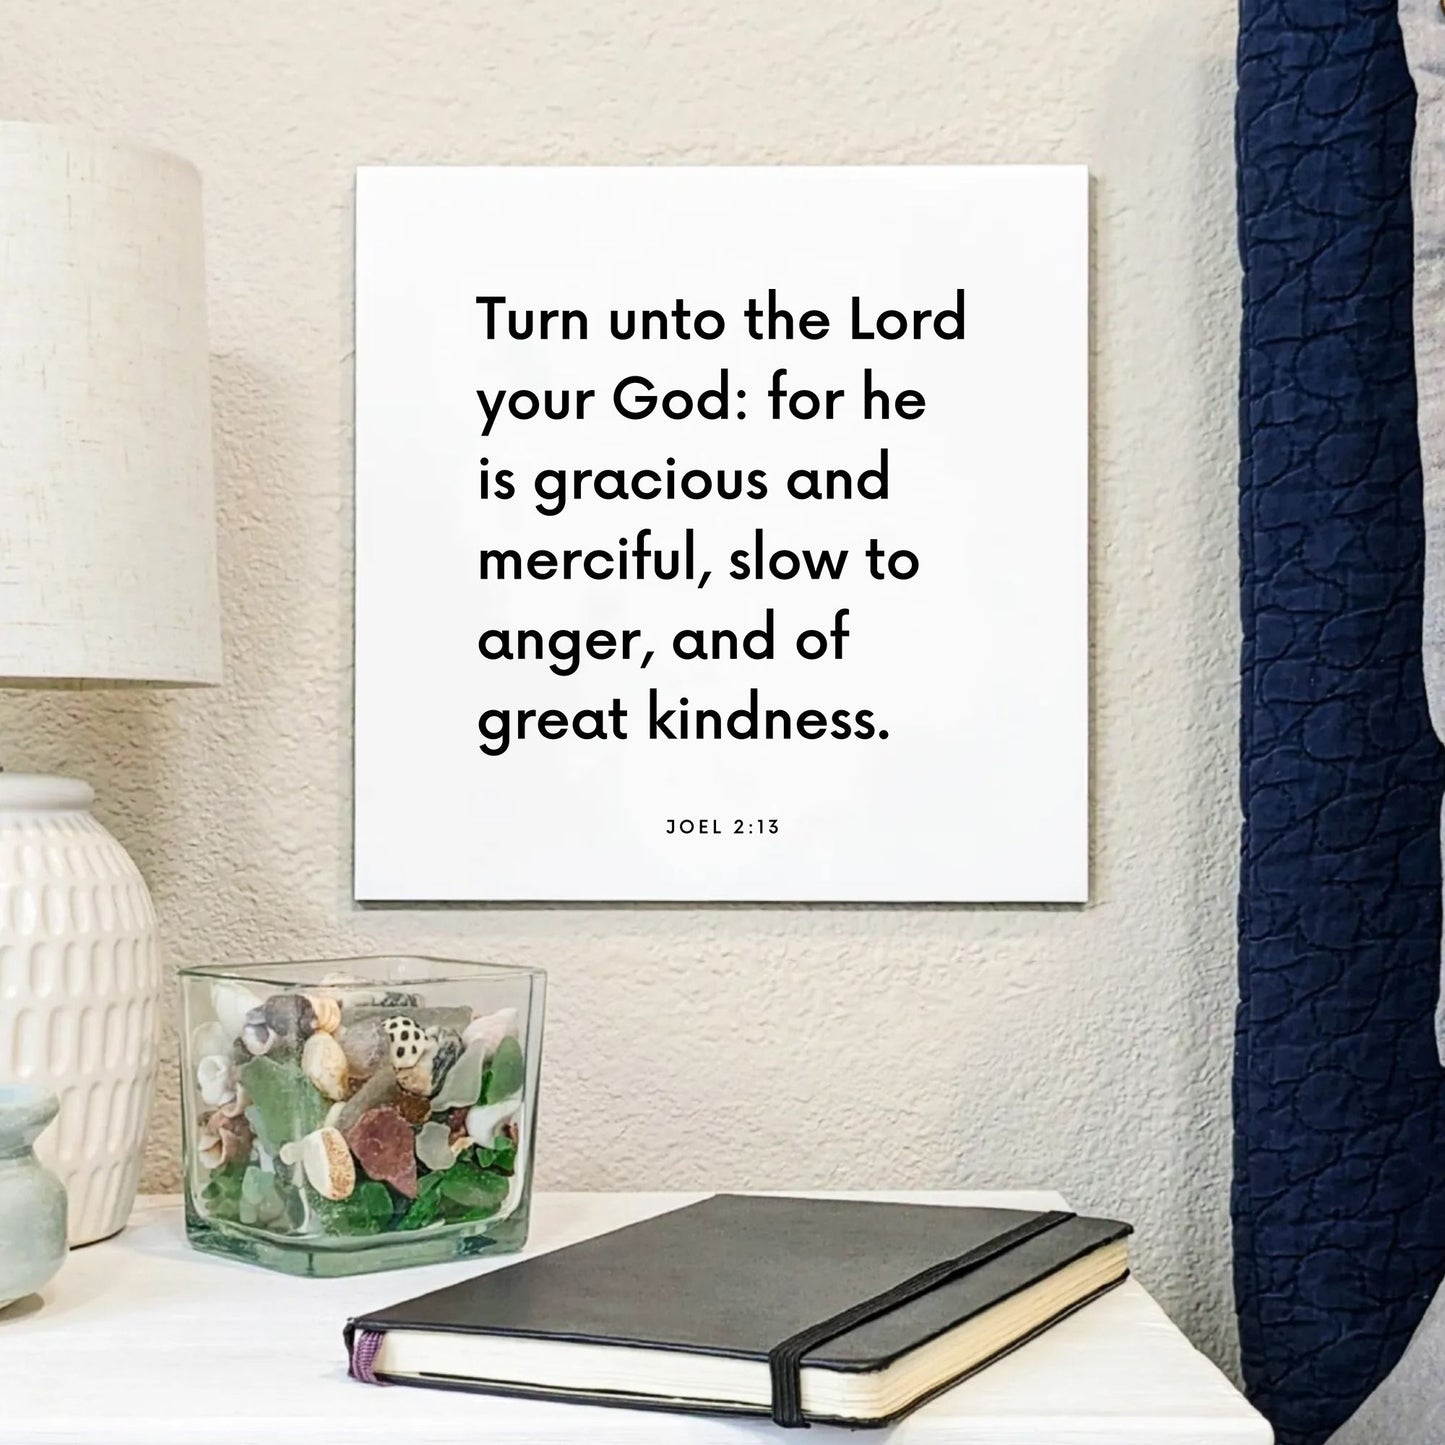 Bedside mouting of the scripture tile for Joel 2:13 - "Turn unto the Lord your God: for he is gracious and merciful"